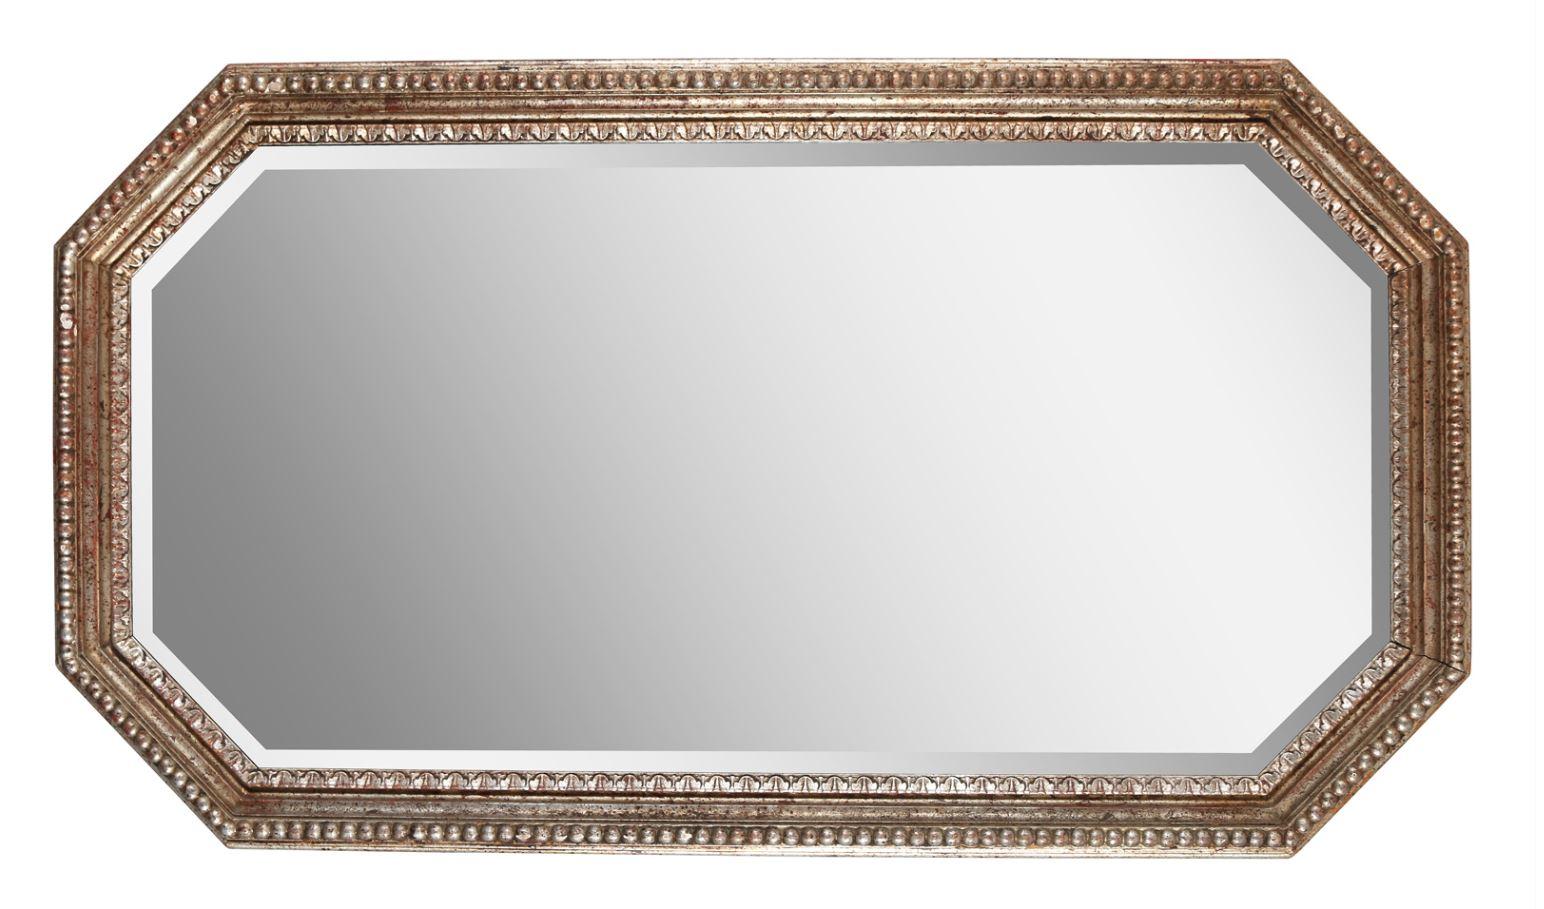 Silver gilt octagonal beaded mirror with beveled edge.